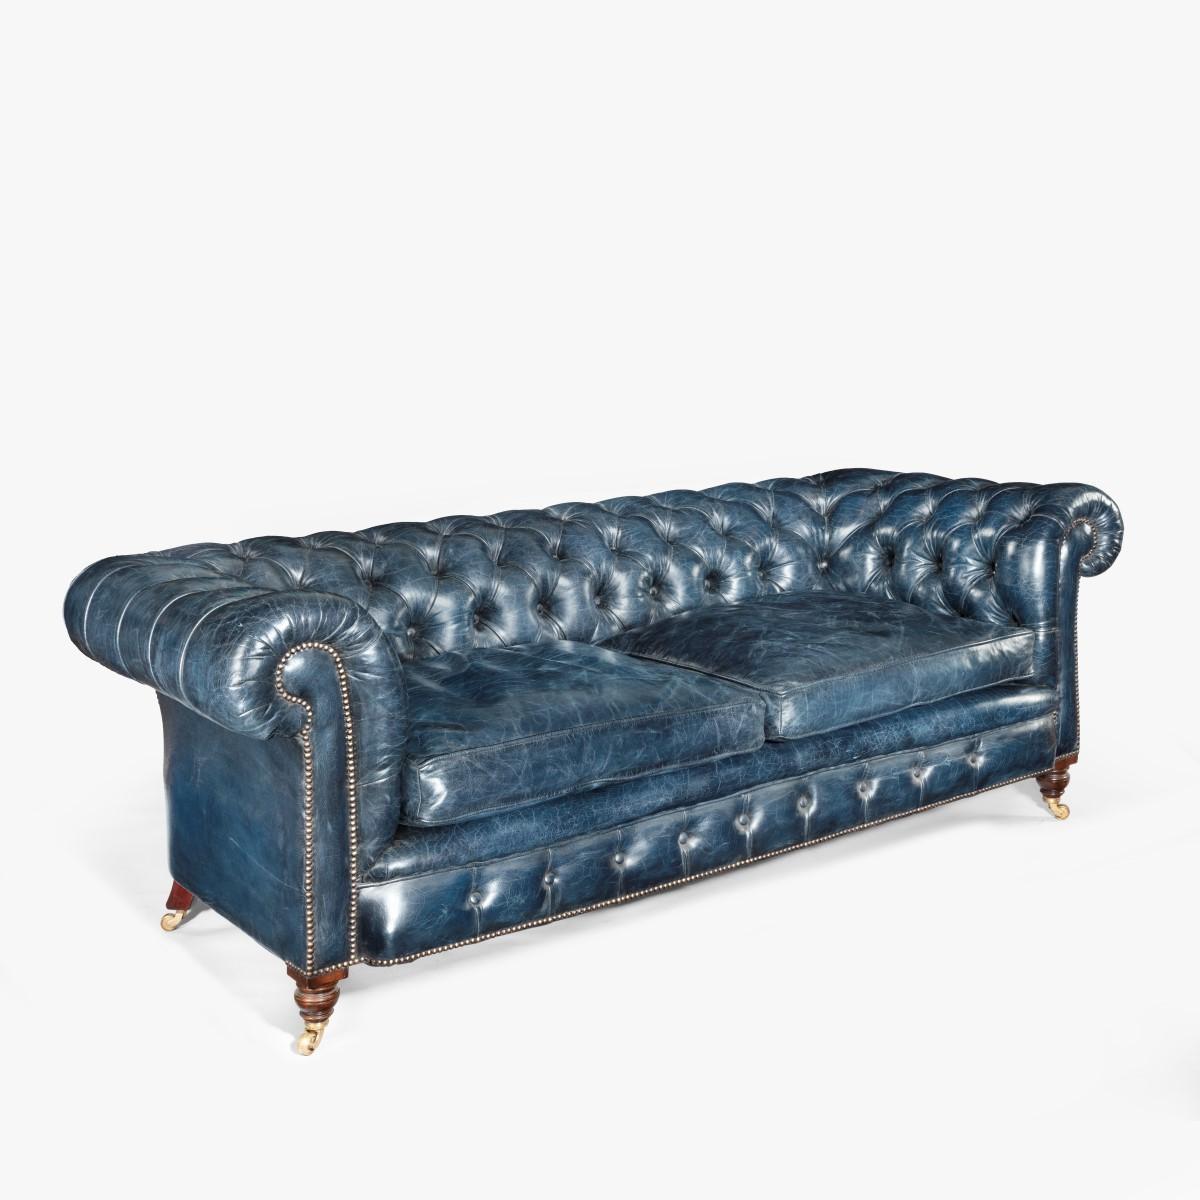 A Victorian 2-seater leather Chesterfield sofa, of typical form with rolled over arms and back, set on turned walnut front legs with the original castors and out-swept back legs, re-upholstered in deep-buttoned distressed blue leather. English,